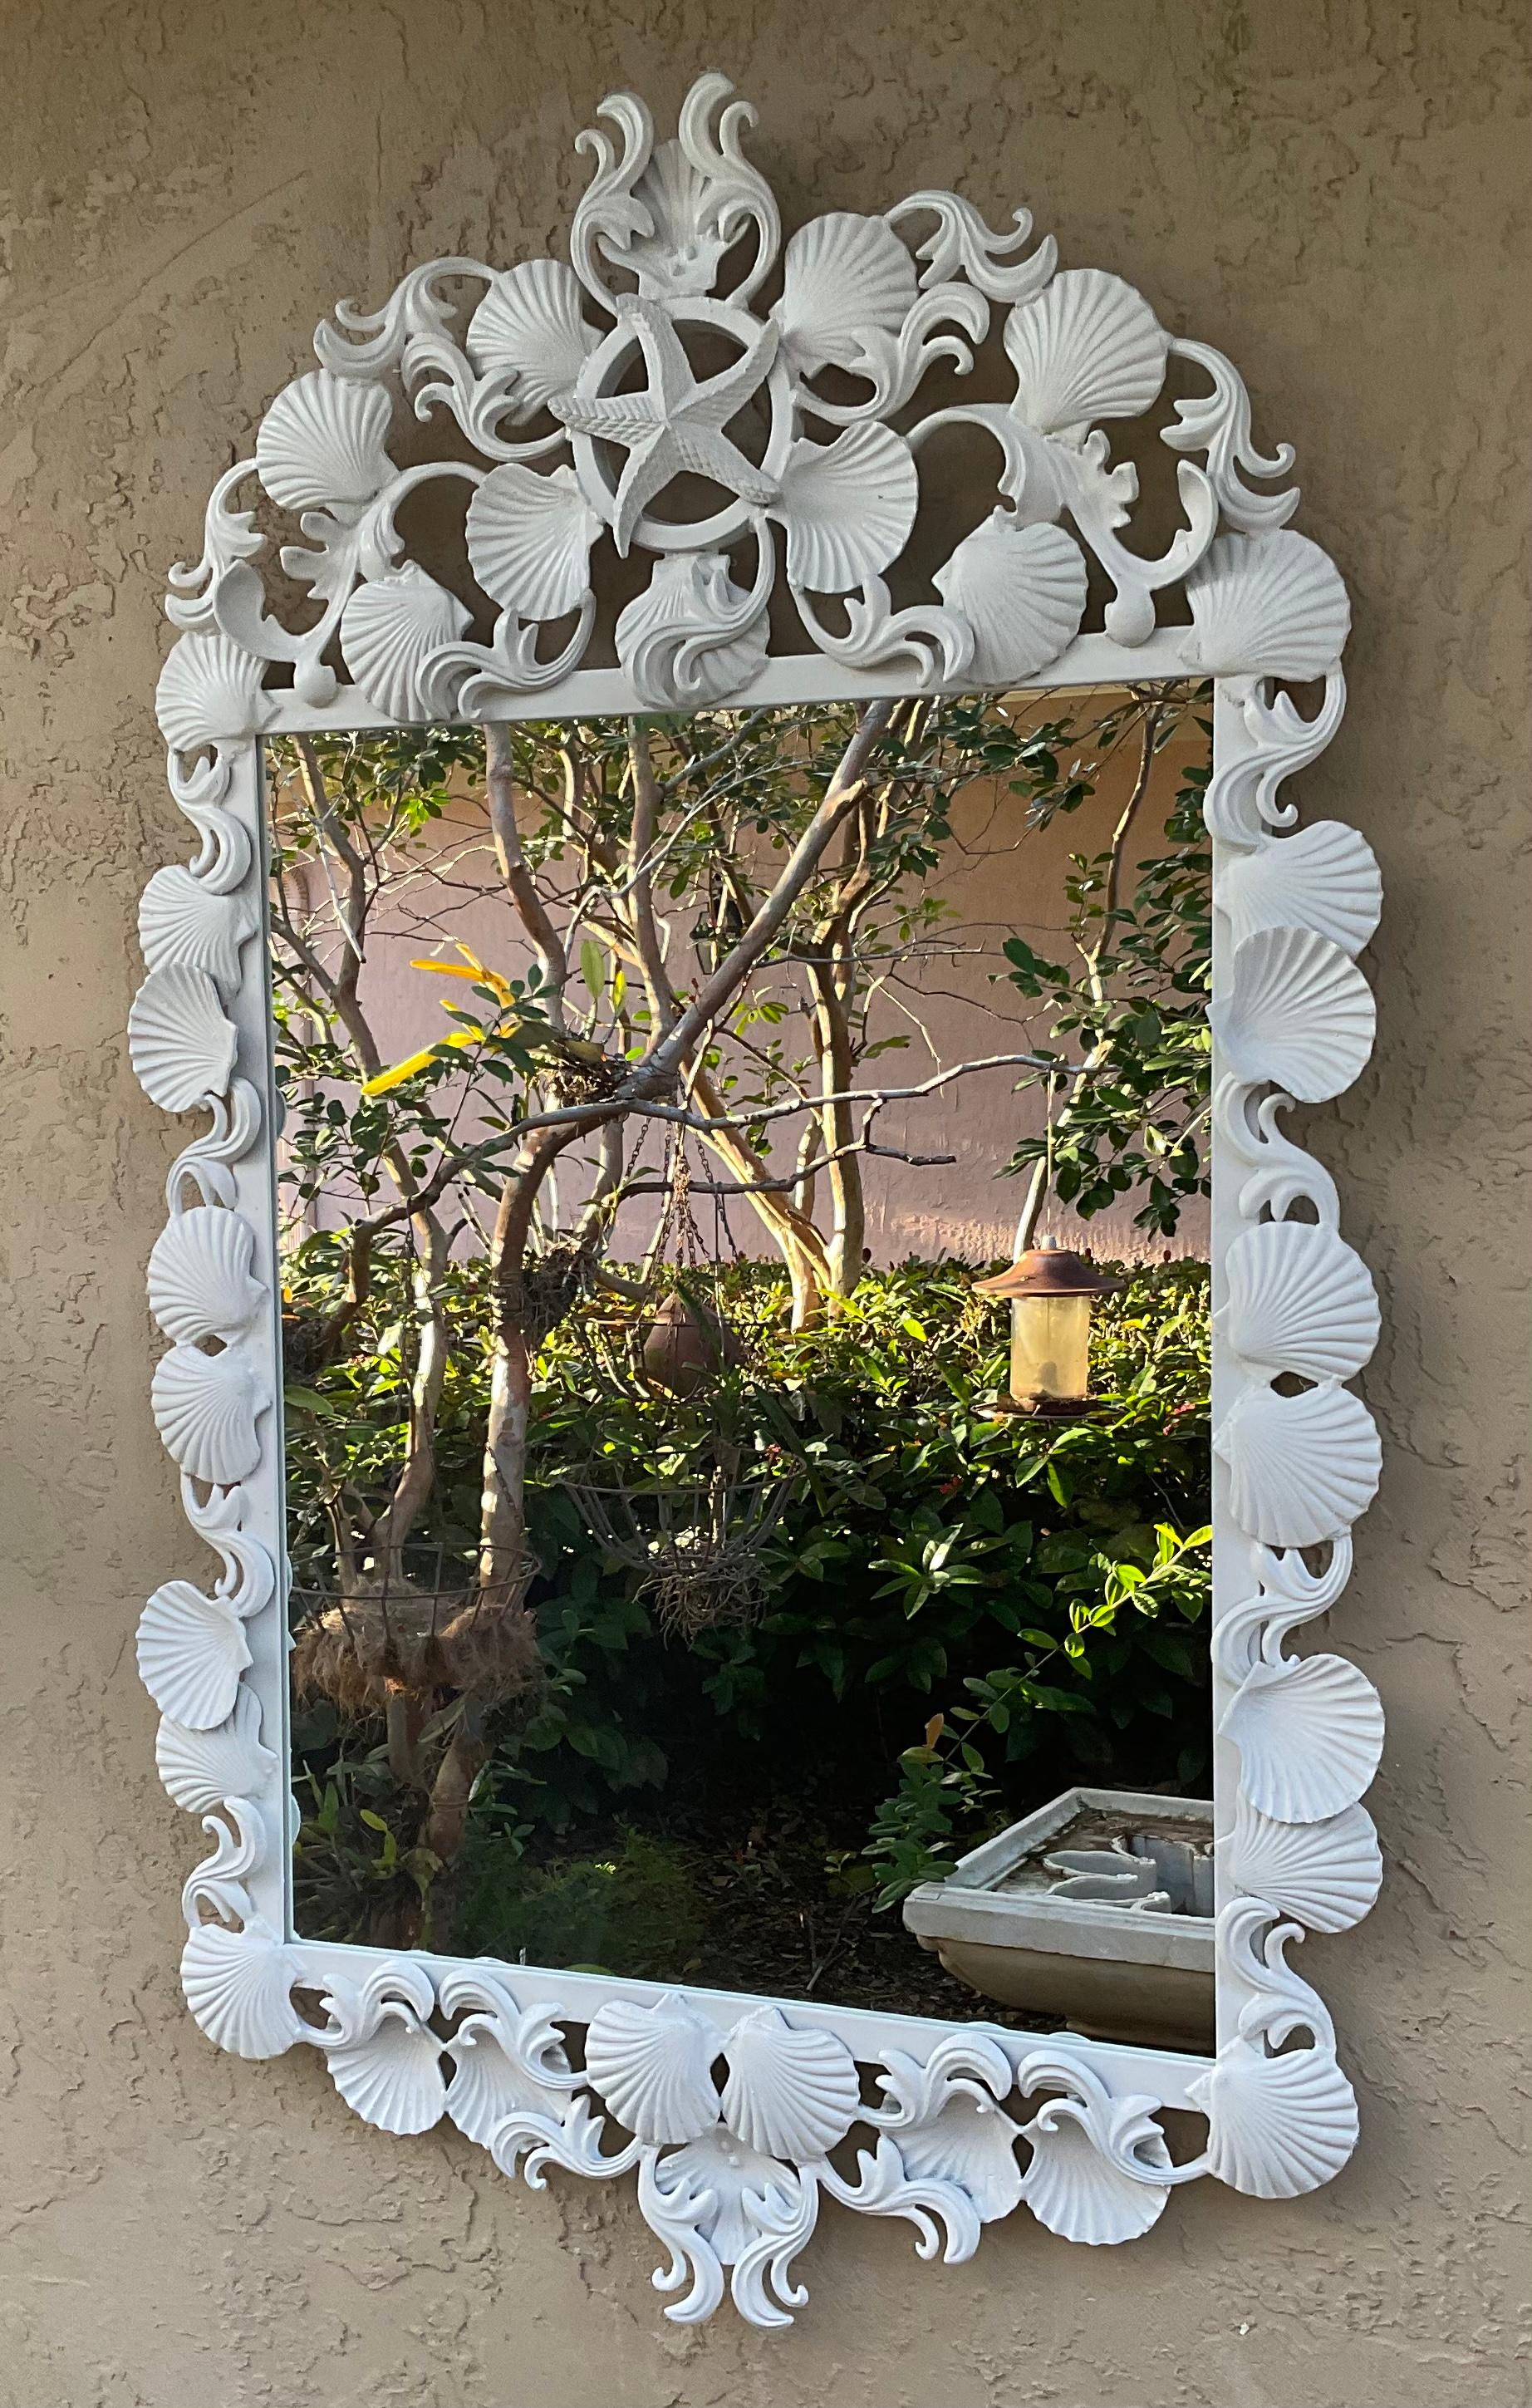 Exceptional mirror made of iron, artistically decorated with seashells and sea star motifs, painted with white acrylic paint .
Exceptional object of art for wall display.

Actual mirror size: 22”.5 x. 28.5.